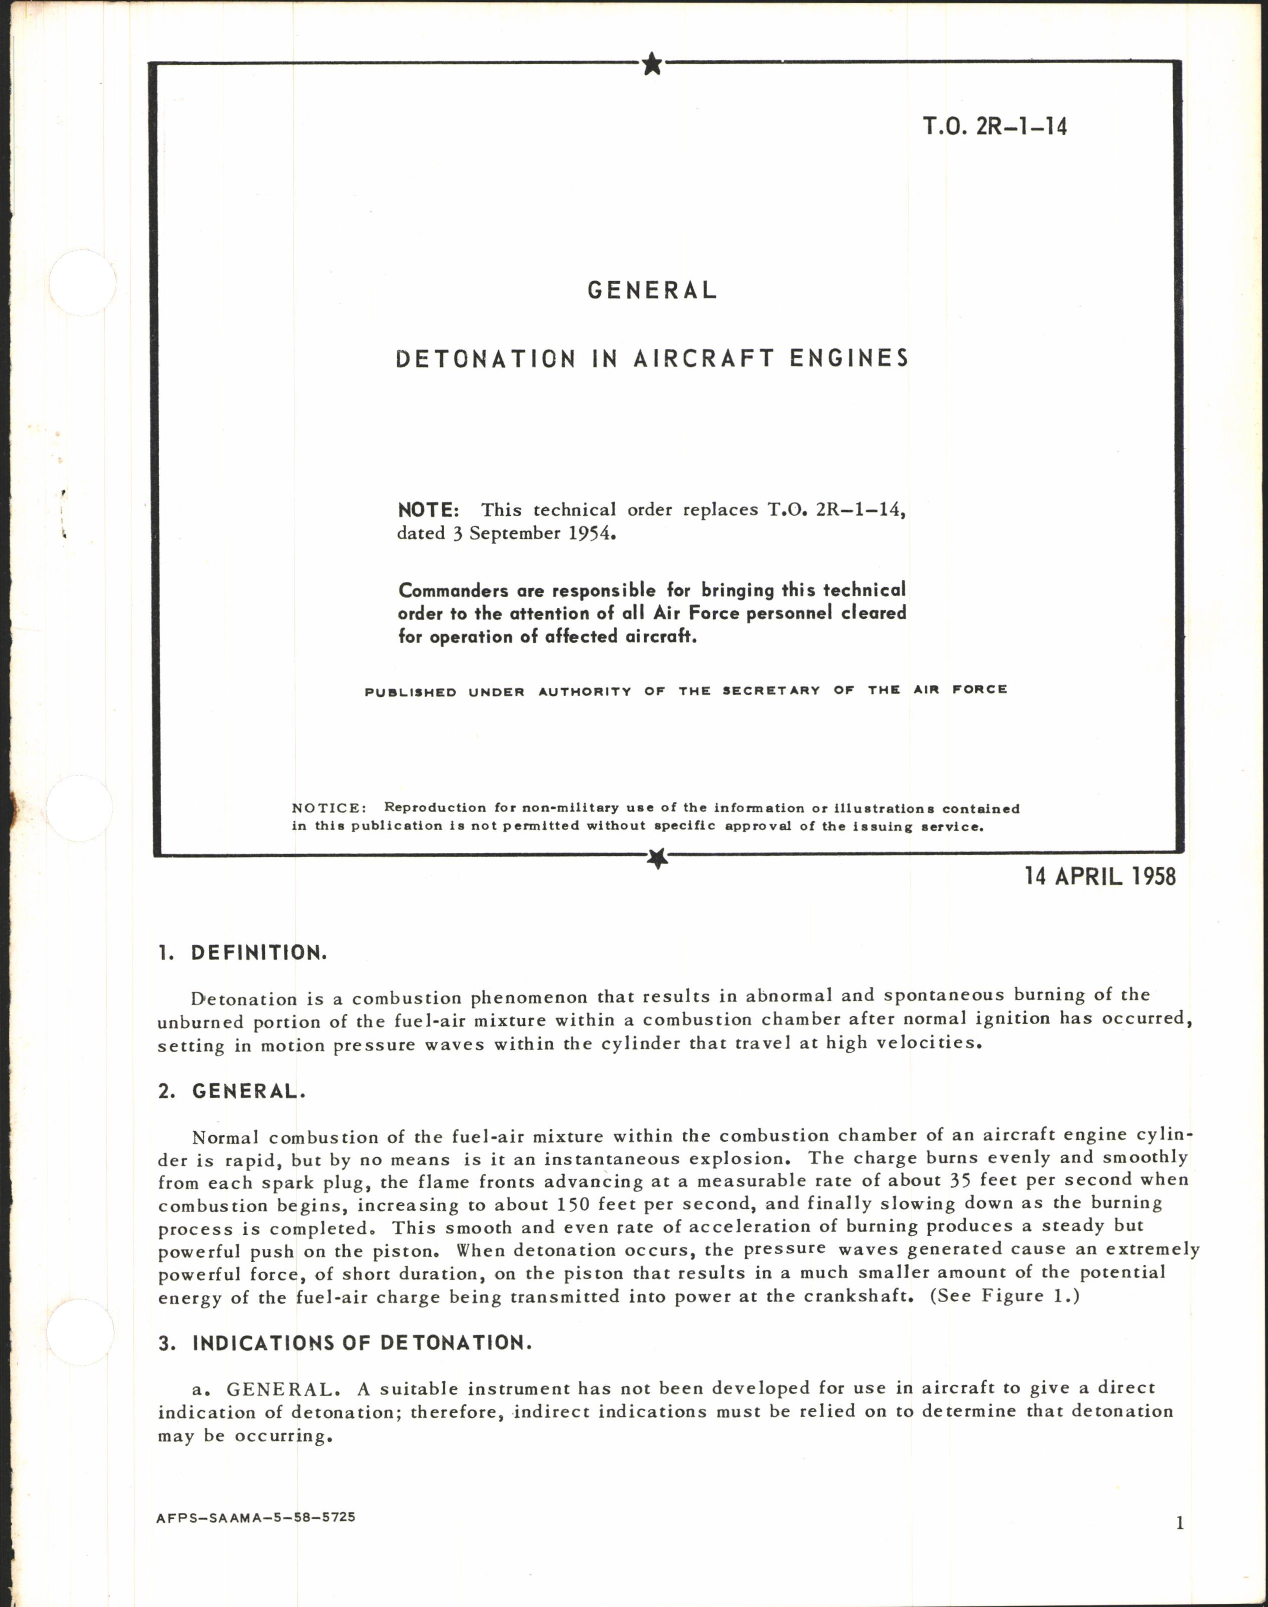 Sample page 1 from AirCorps Library document: Detonation in Aircraft Engines